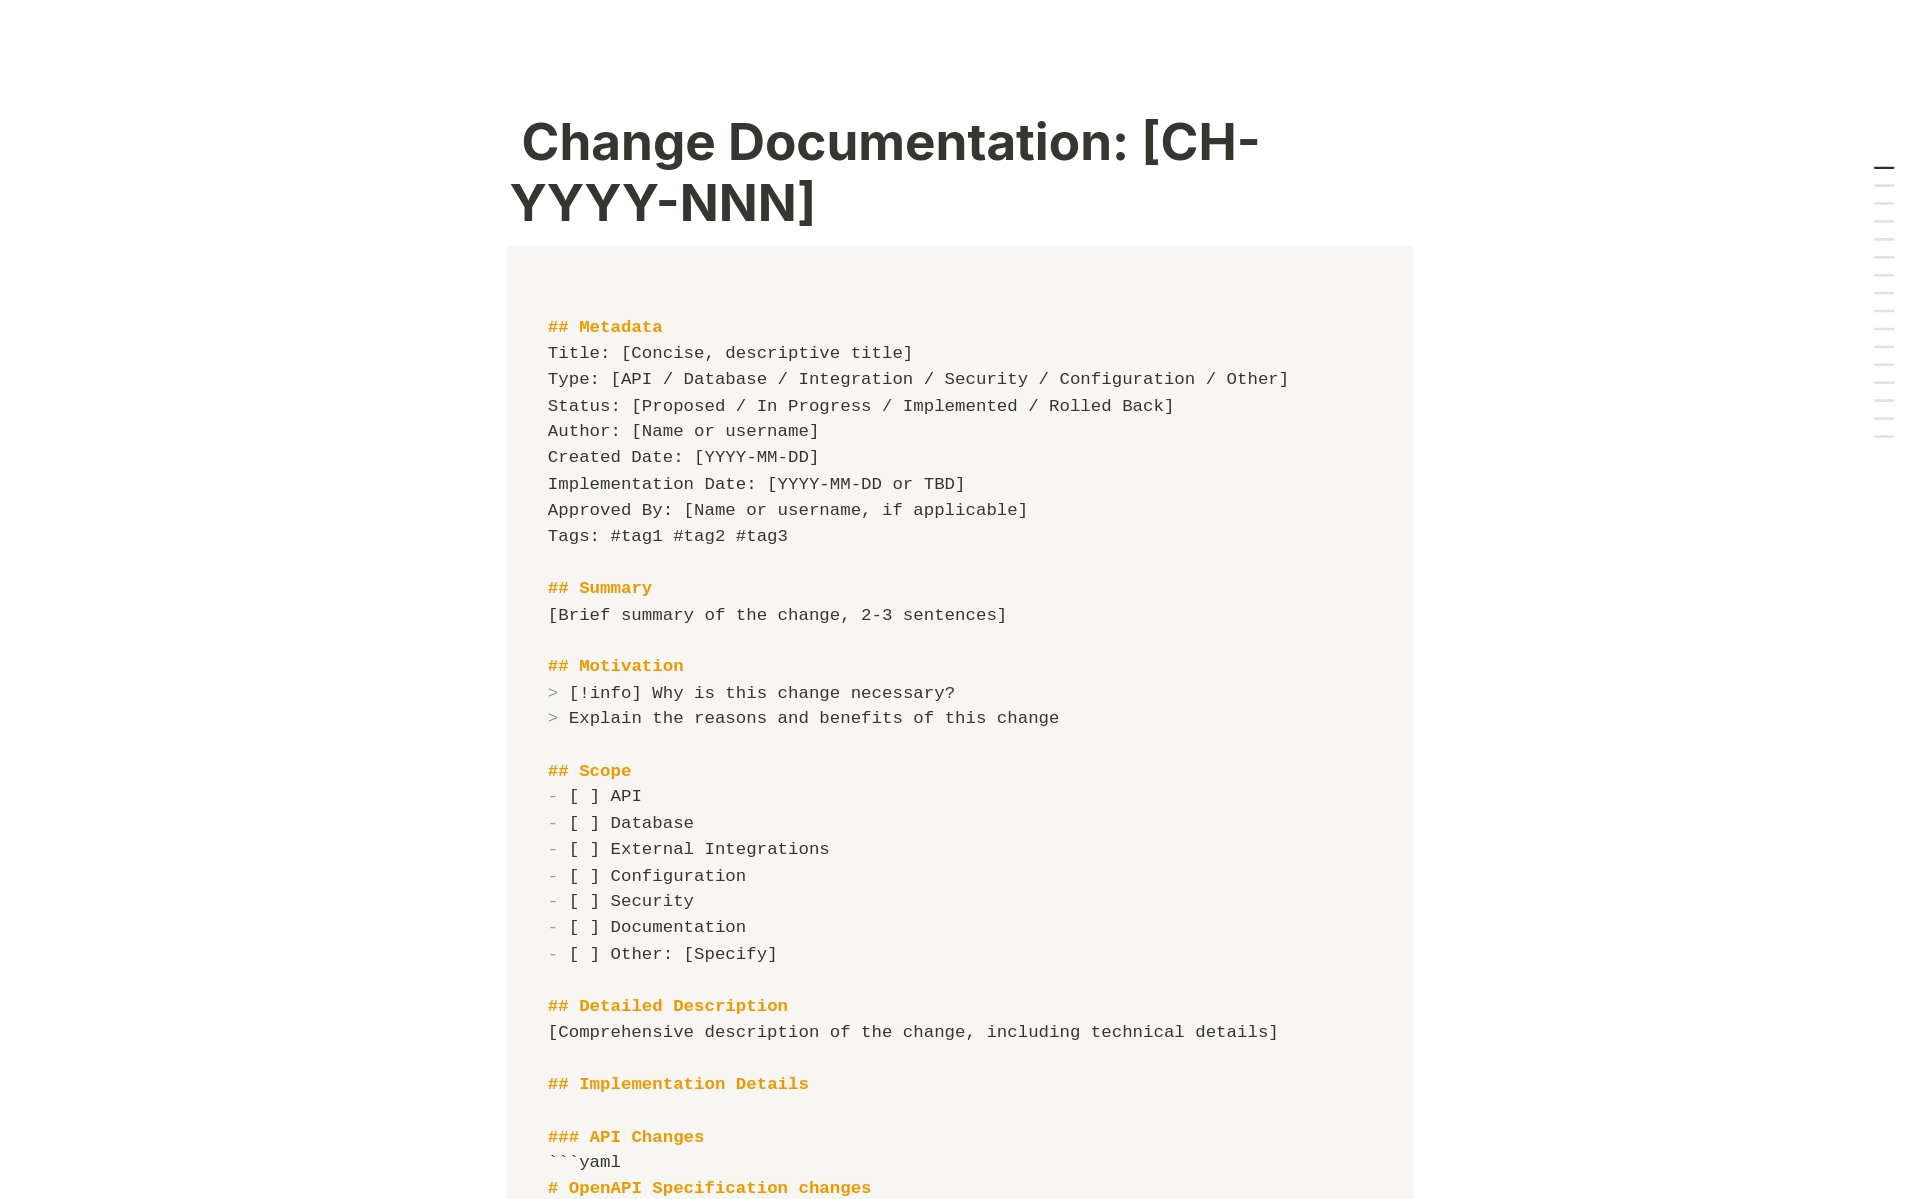 This template is designed for comprehensive documentation of system changes in Notion. It provides a structured format to capture all essential aspects of a change, from initial proposal to post-implementation review.